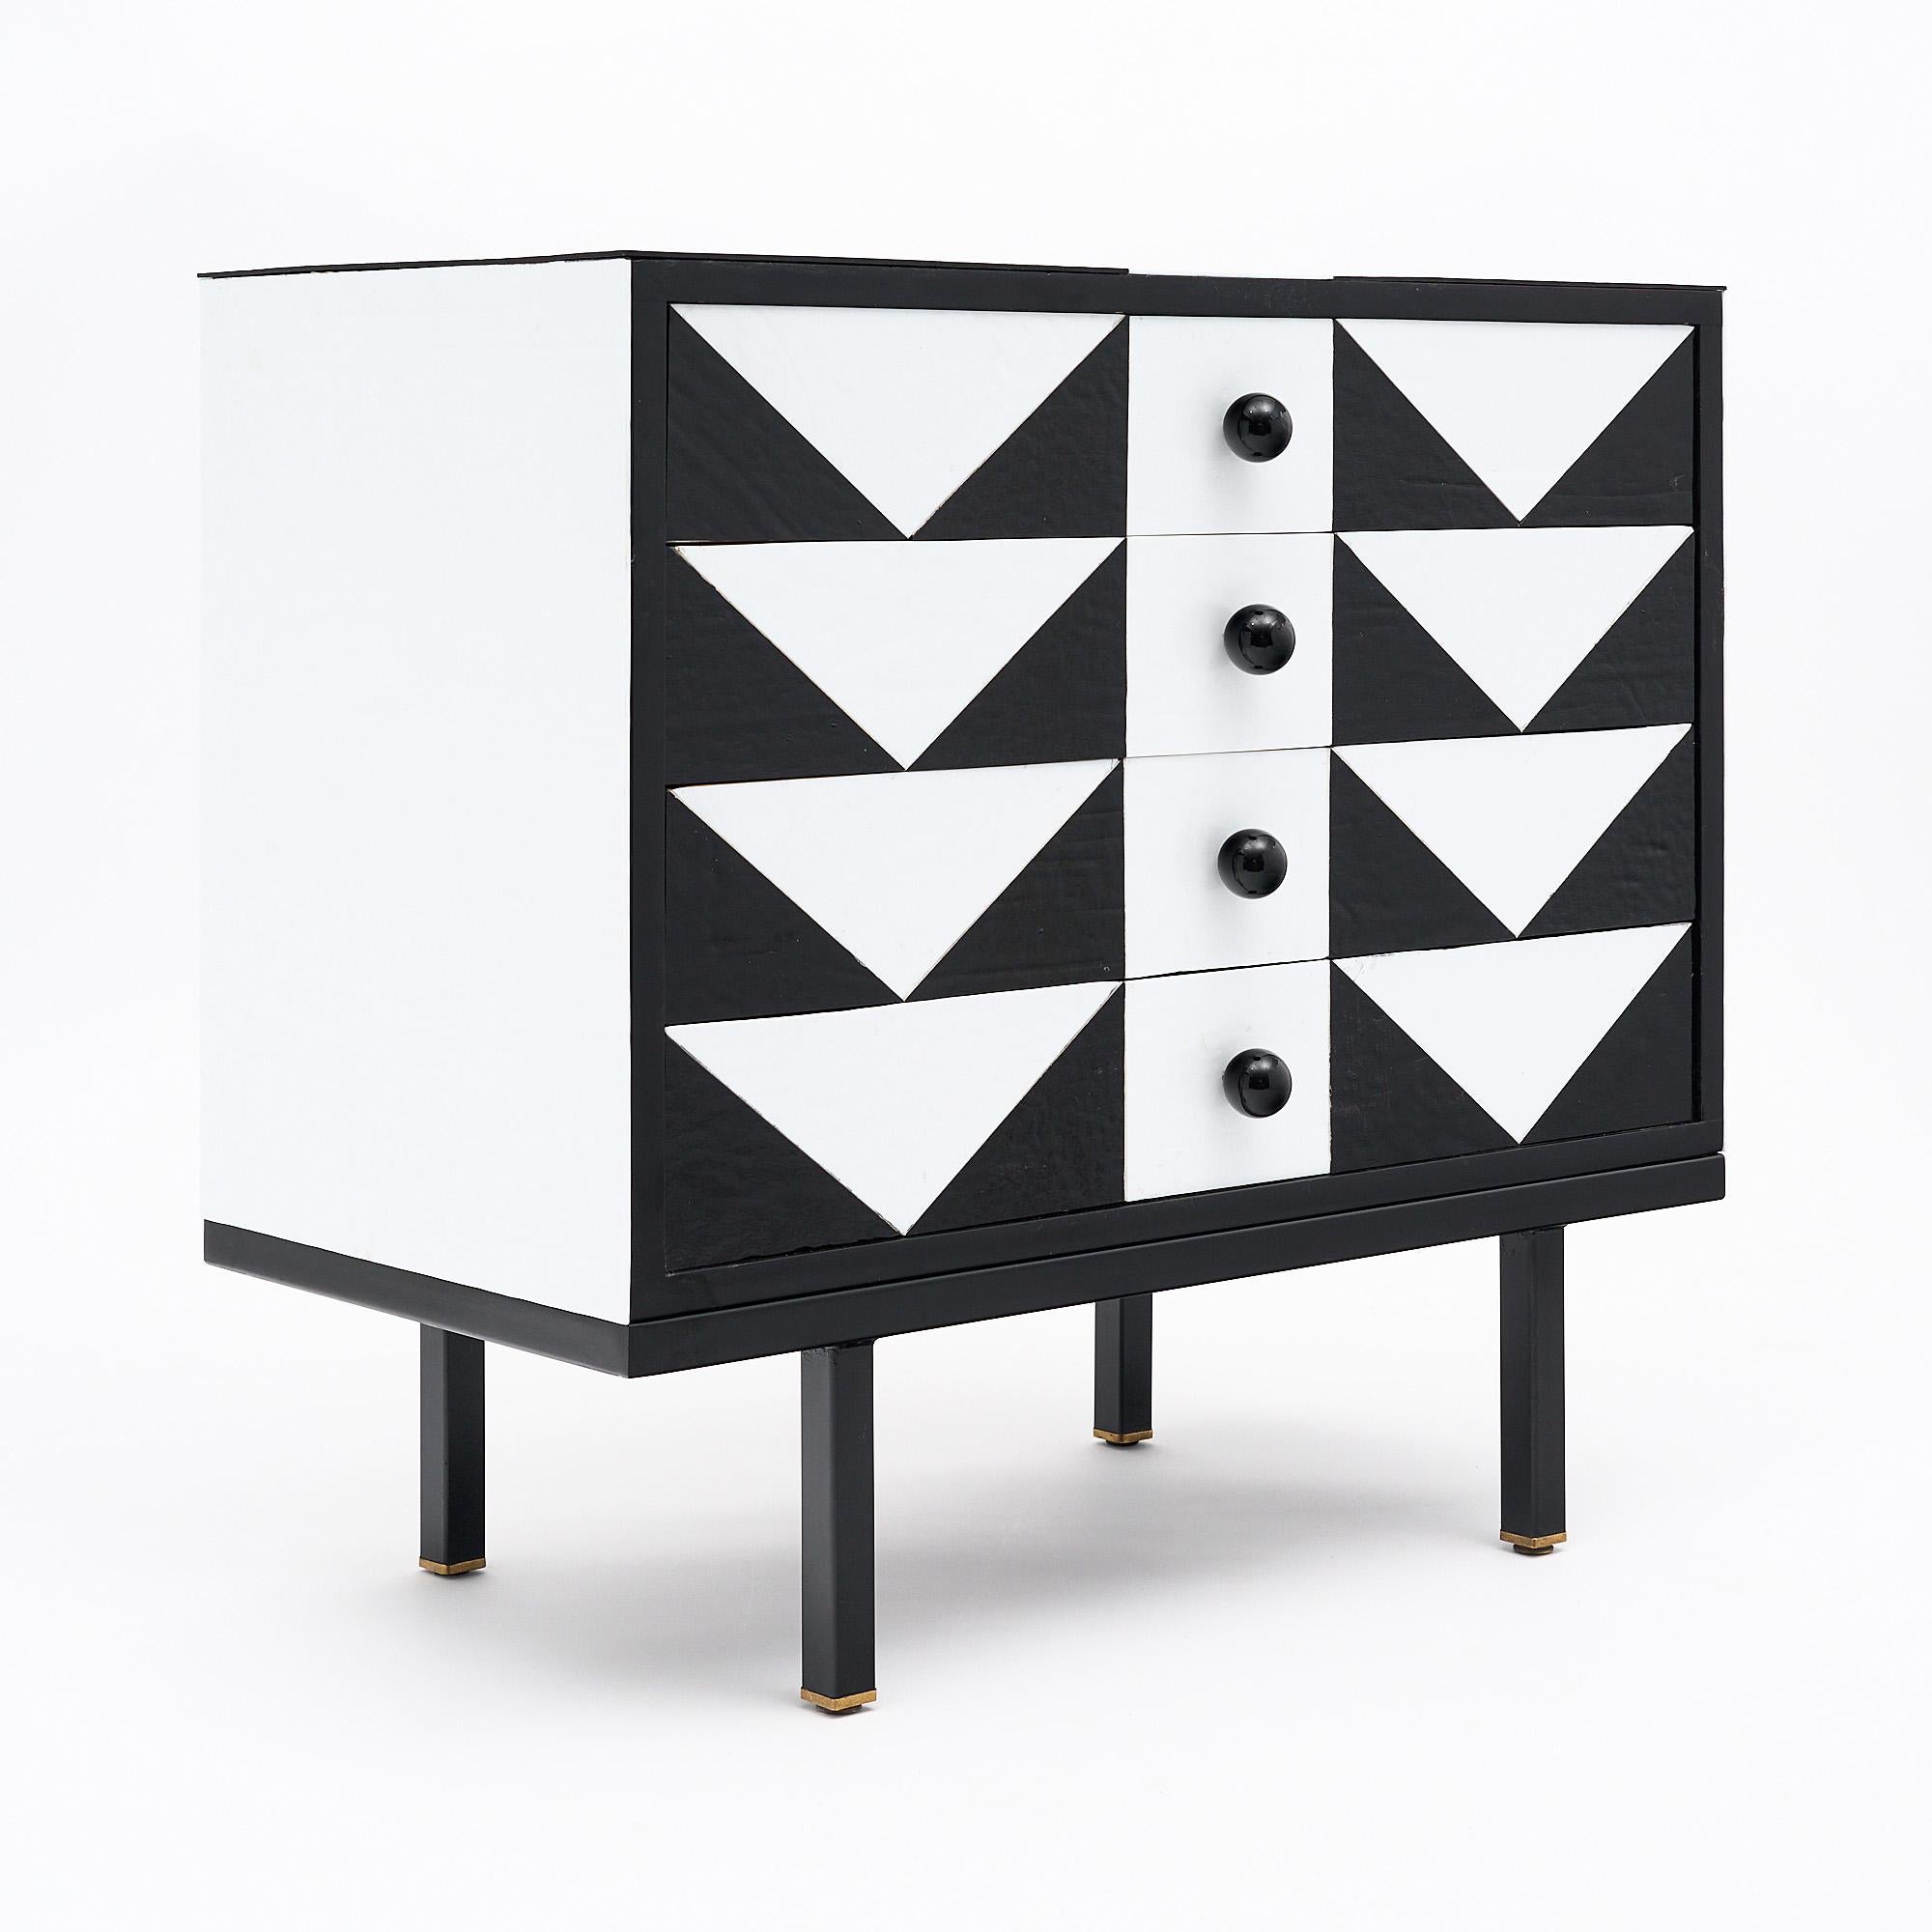 Chest of drawers, Italian, from the Veneto region, this nicely proportioned Italian vintage chest has been fully veneered with black and white slabs of Murano glass, it features four dovetailed drawers each with spheric black Murano glass pull. The